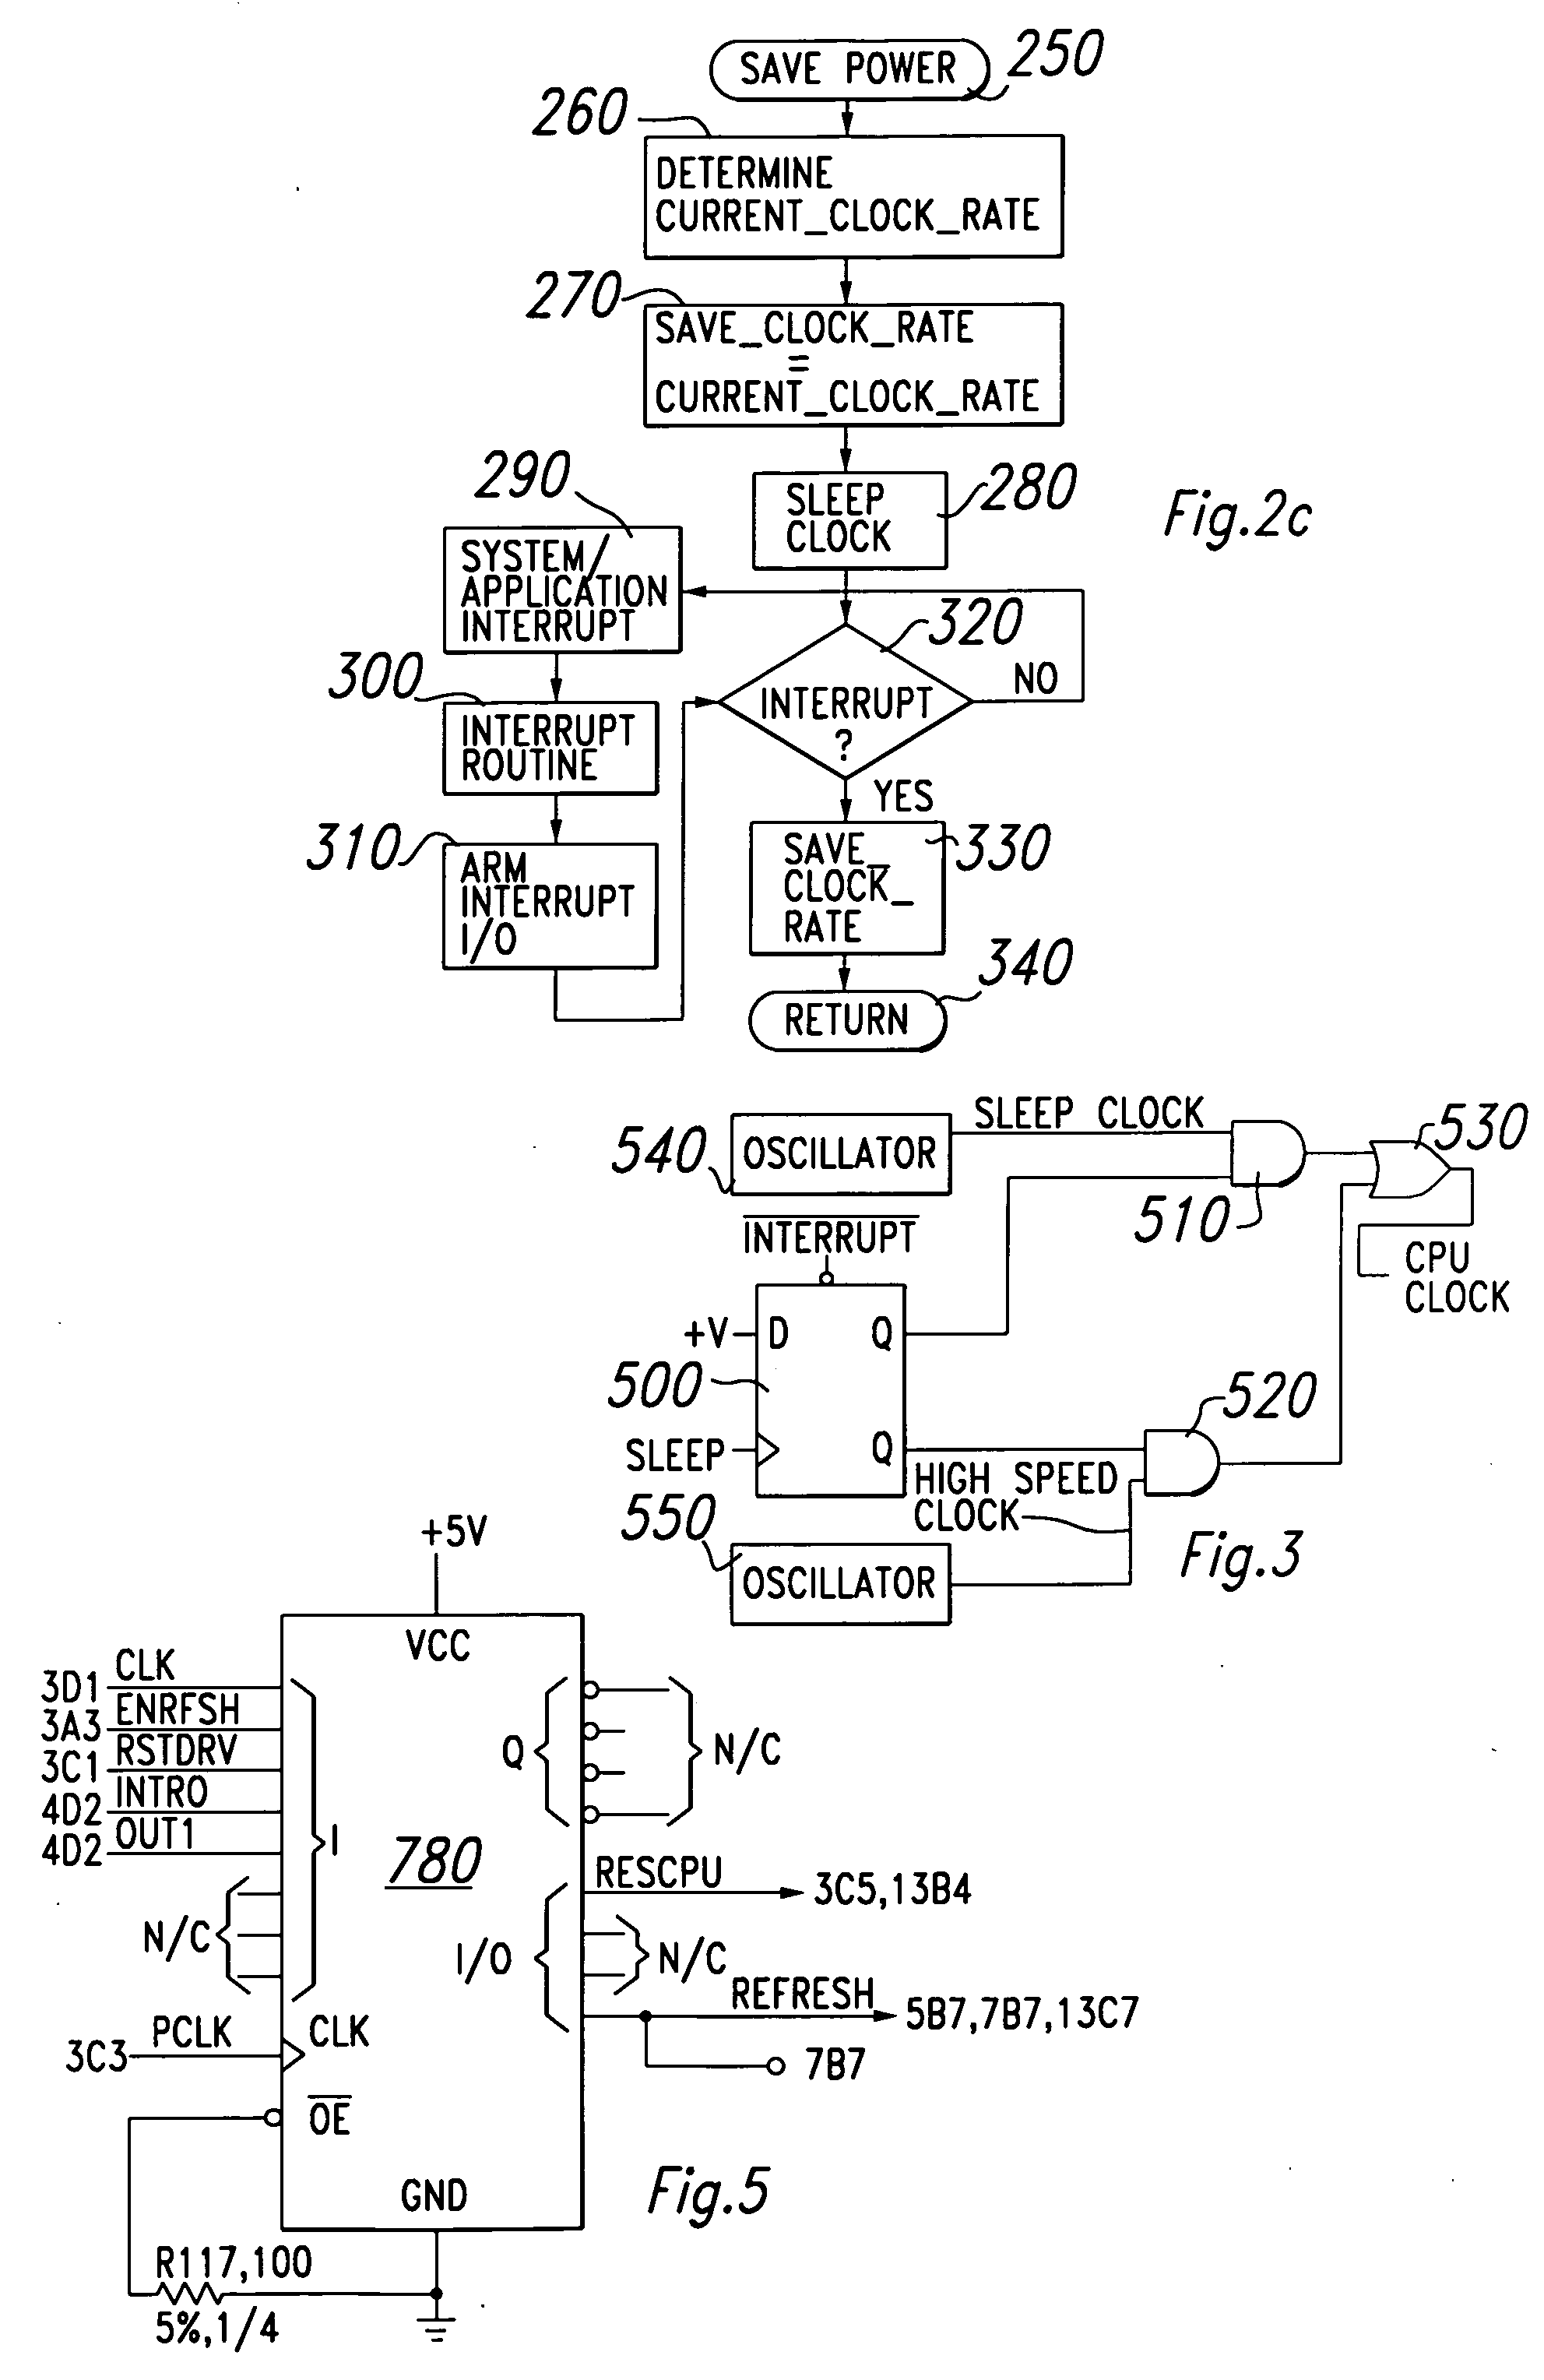 Apparatus employing real-time power conservation and thermal management